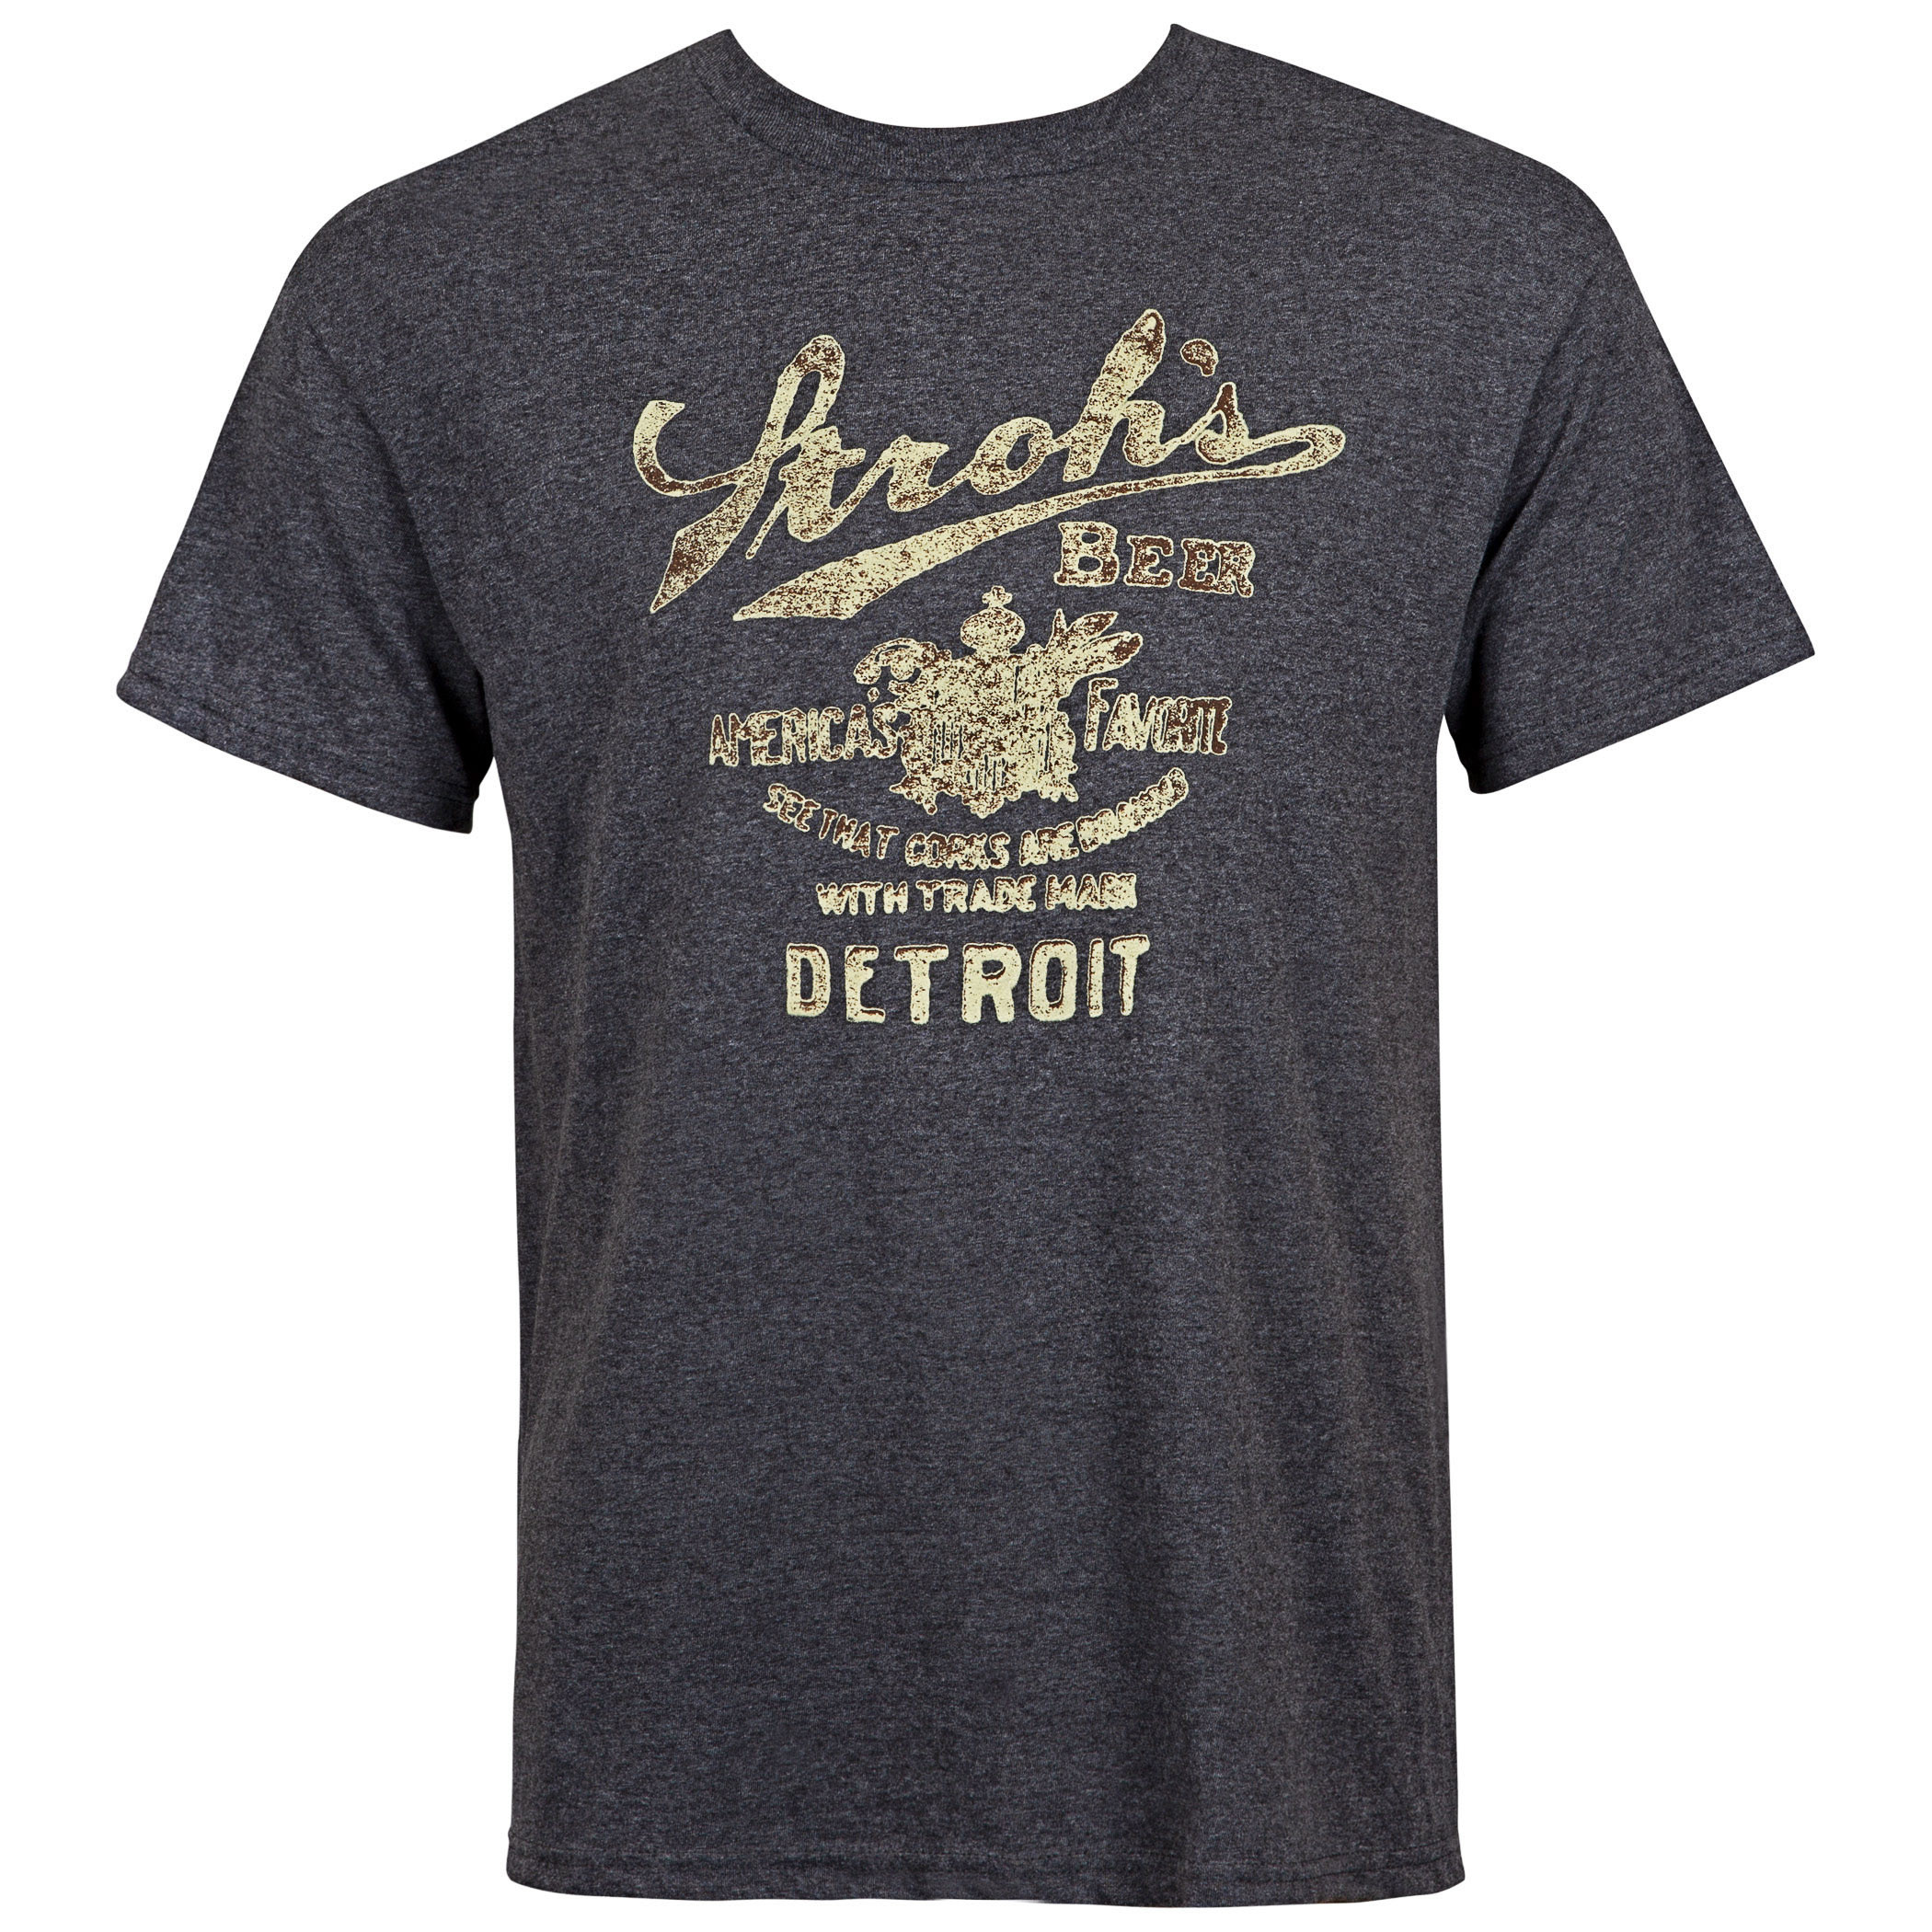 Stroh's Black And Gold Label Tee Shirt